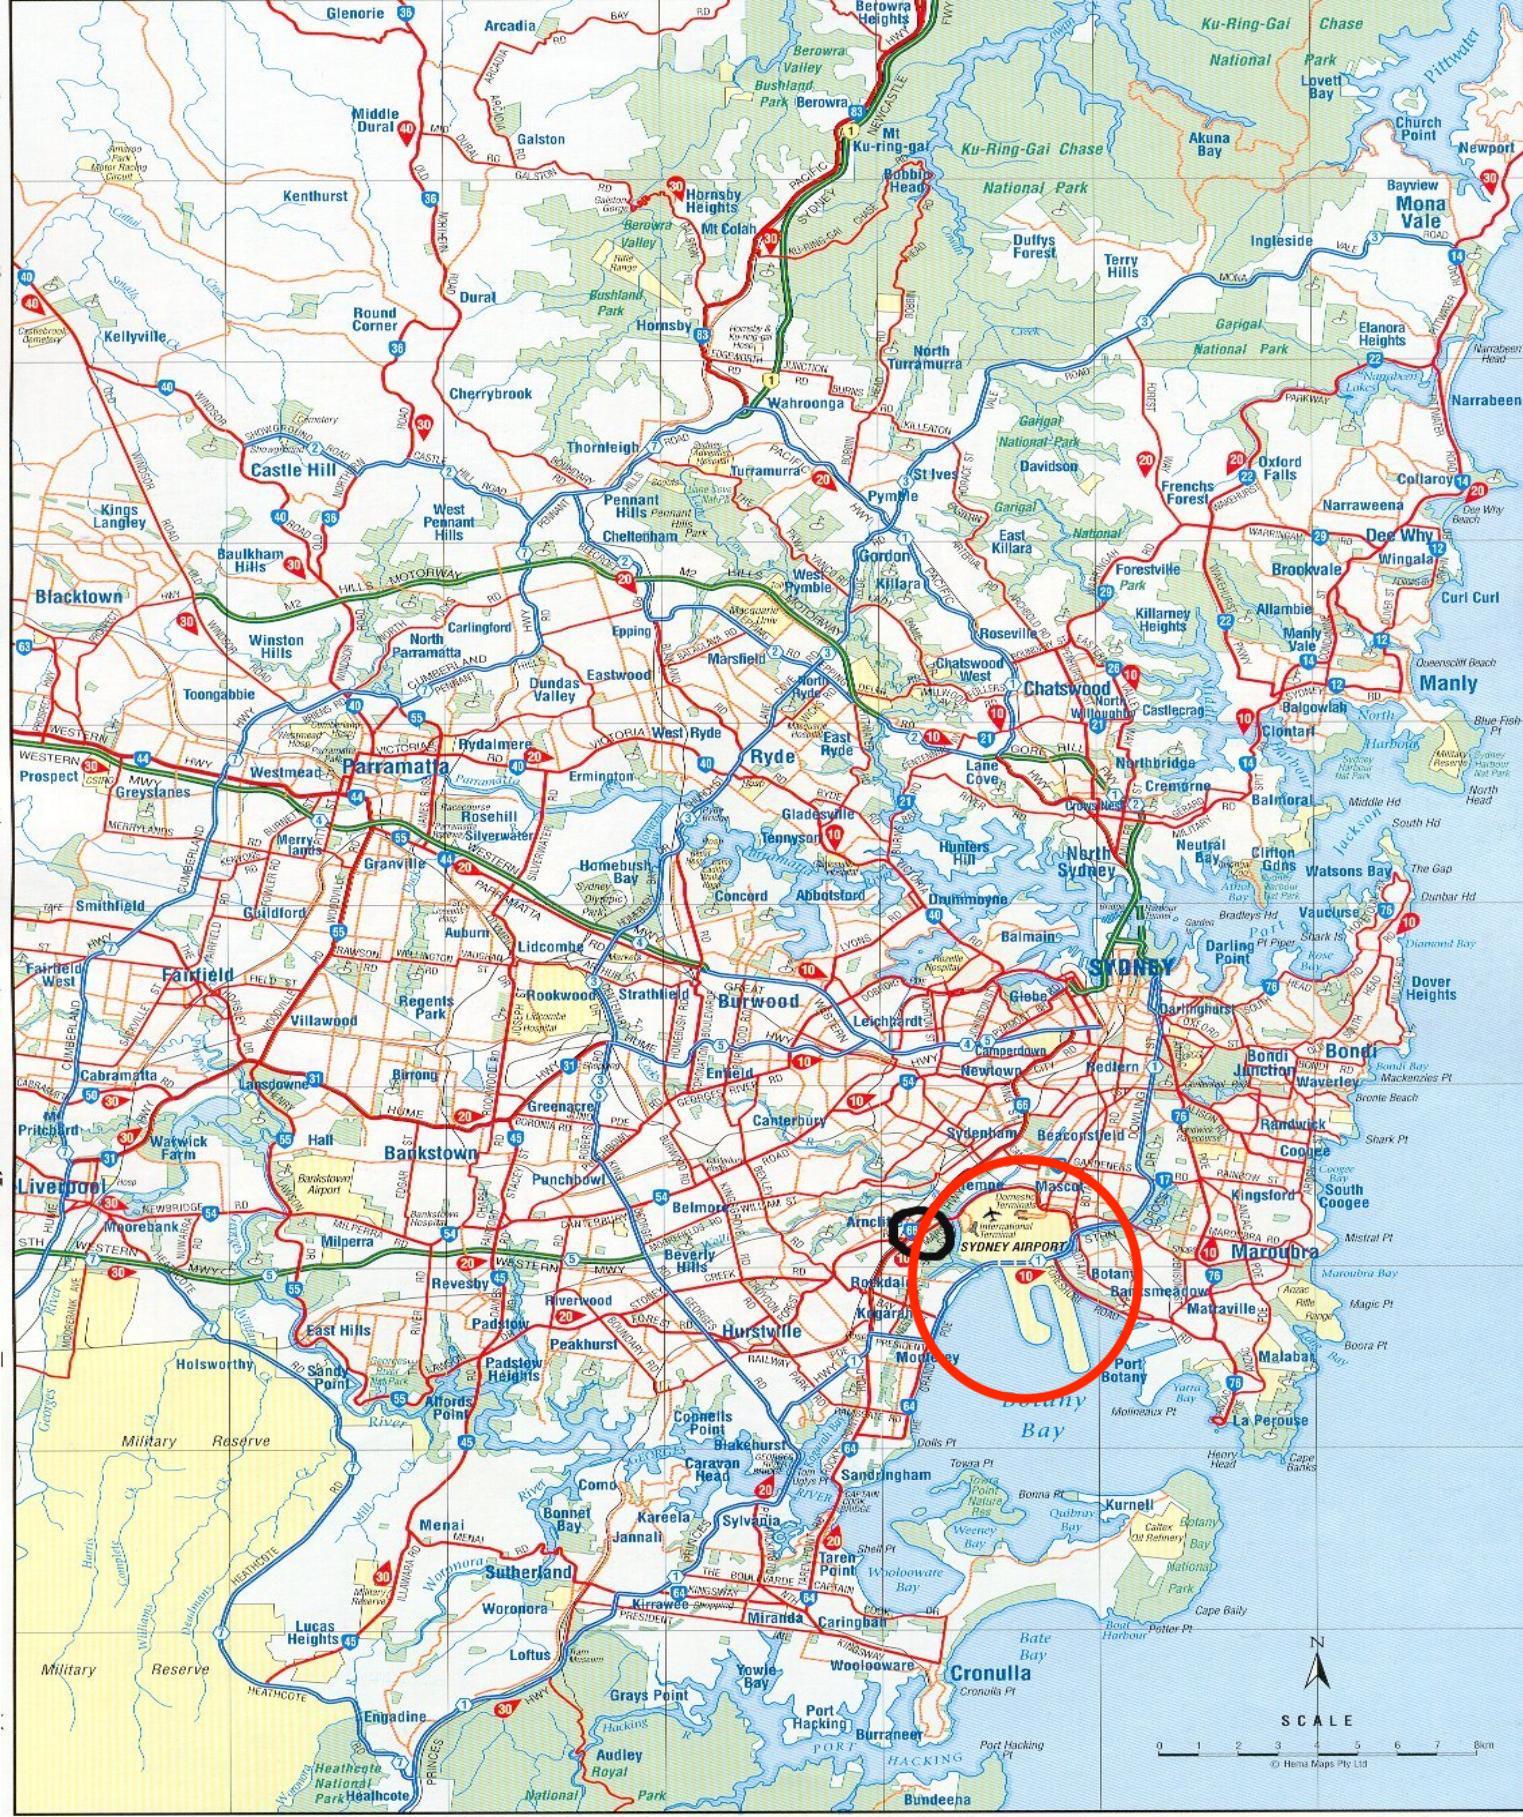 Map of Sydney airport: airport terminals and airport gates of Sydney